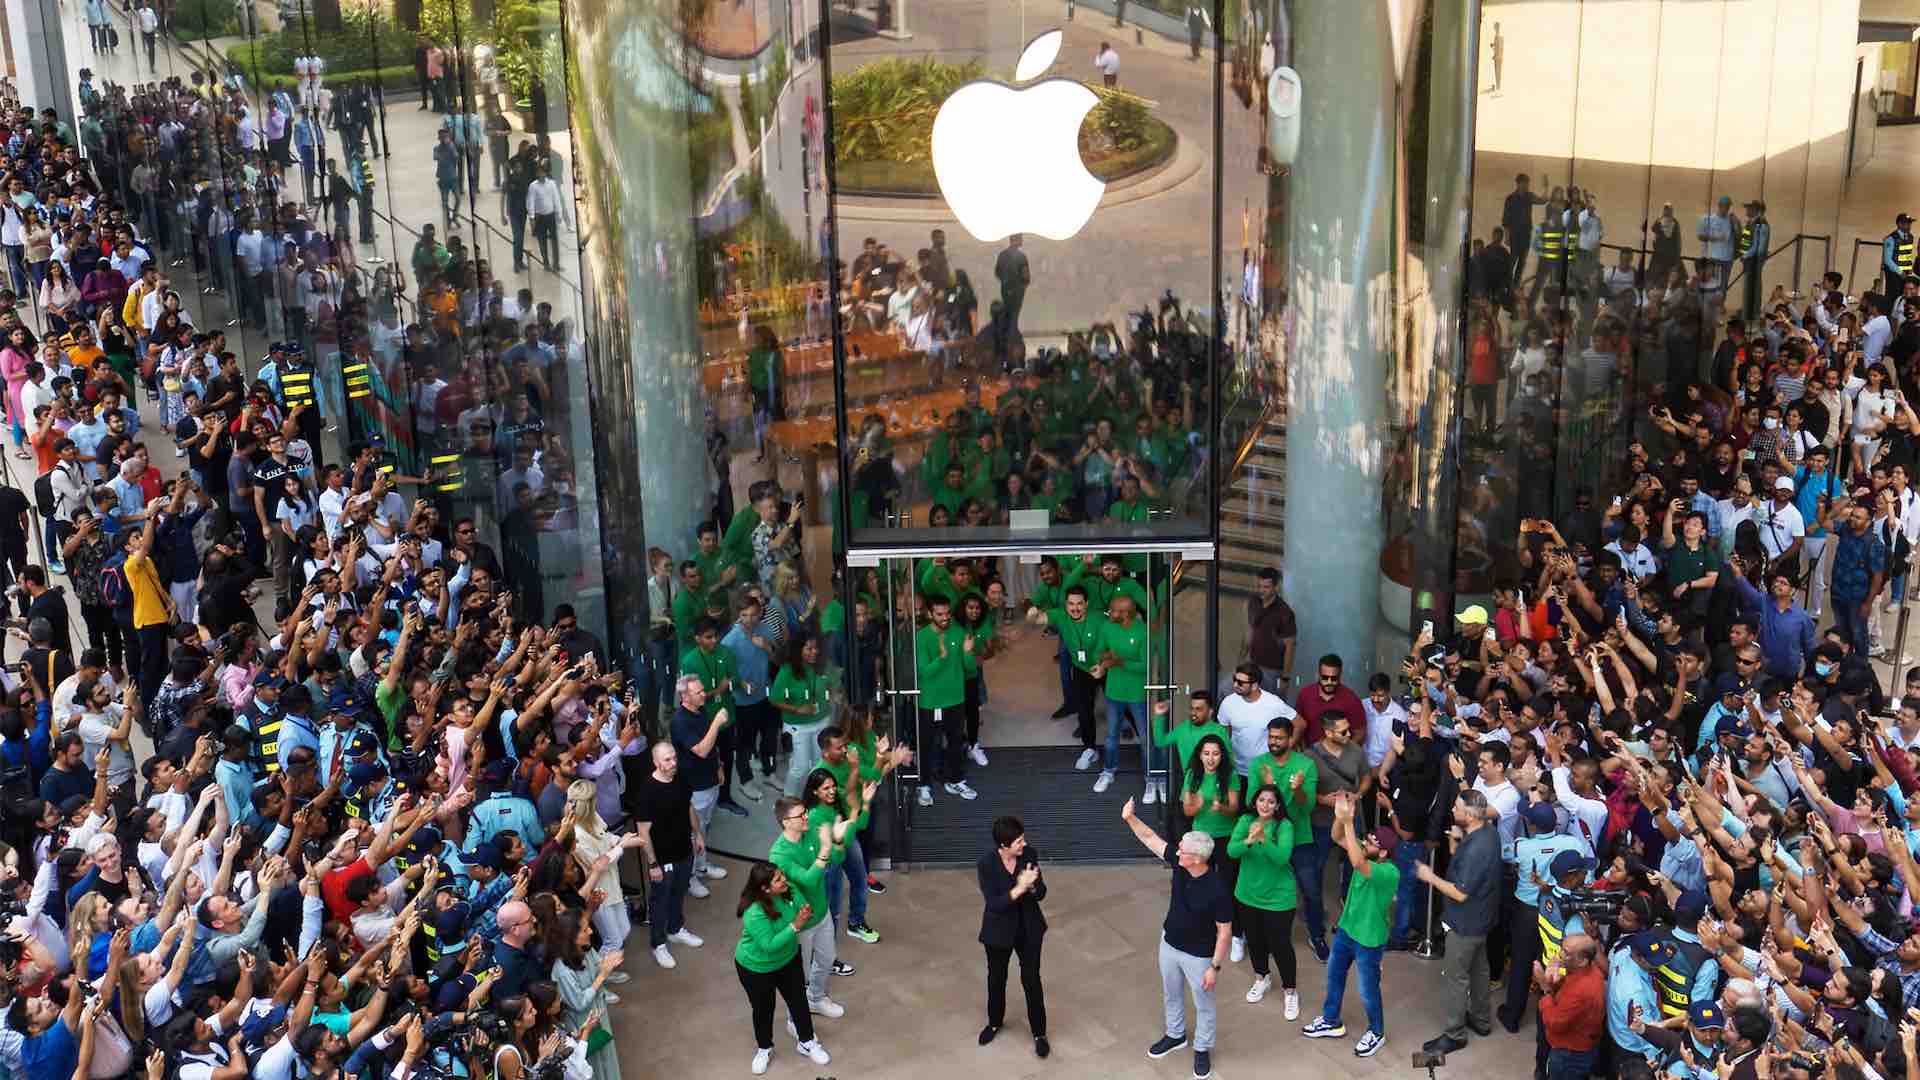 Apple's investment in India reflects confidence in market potential